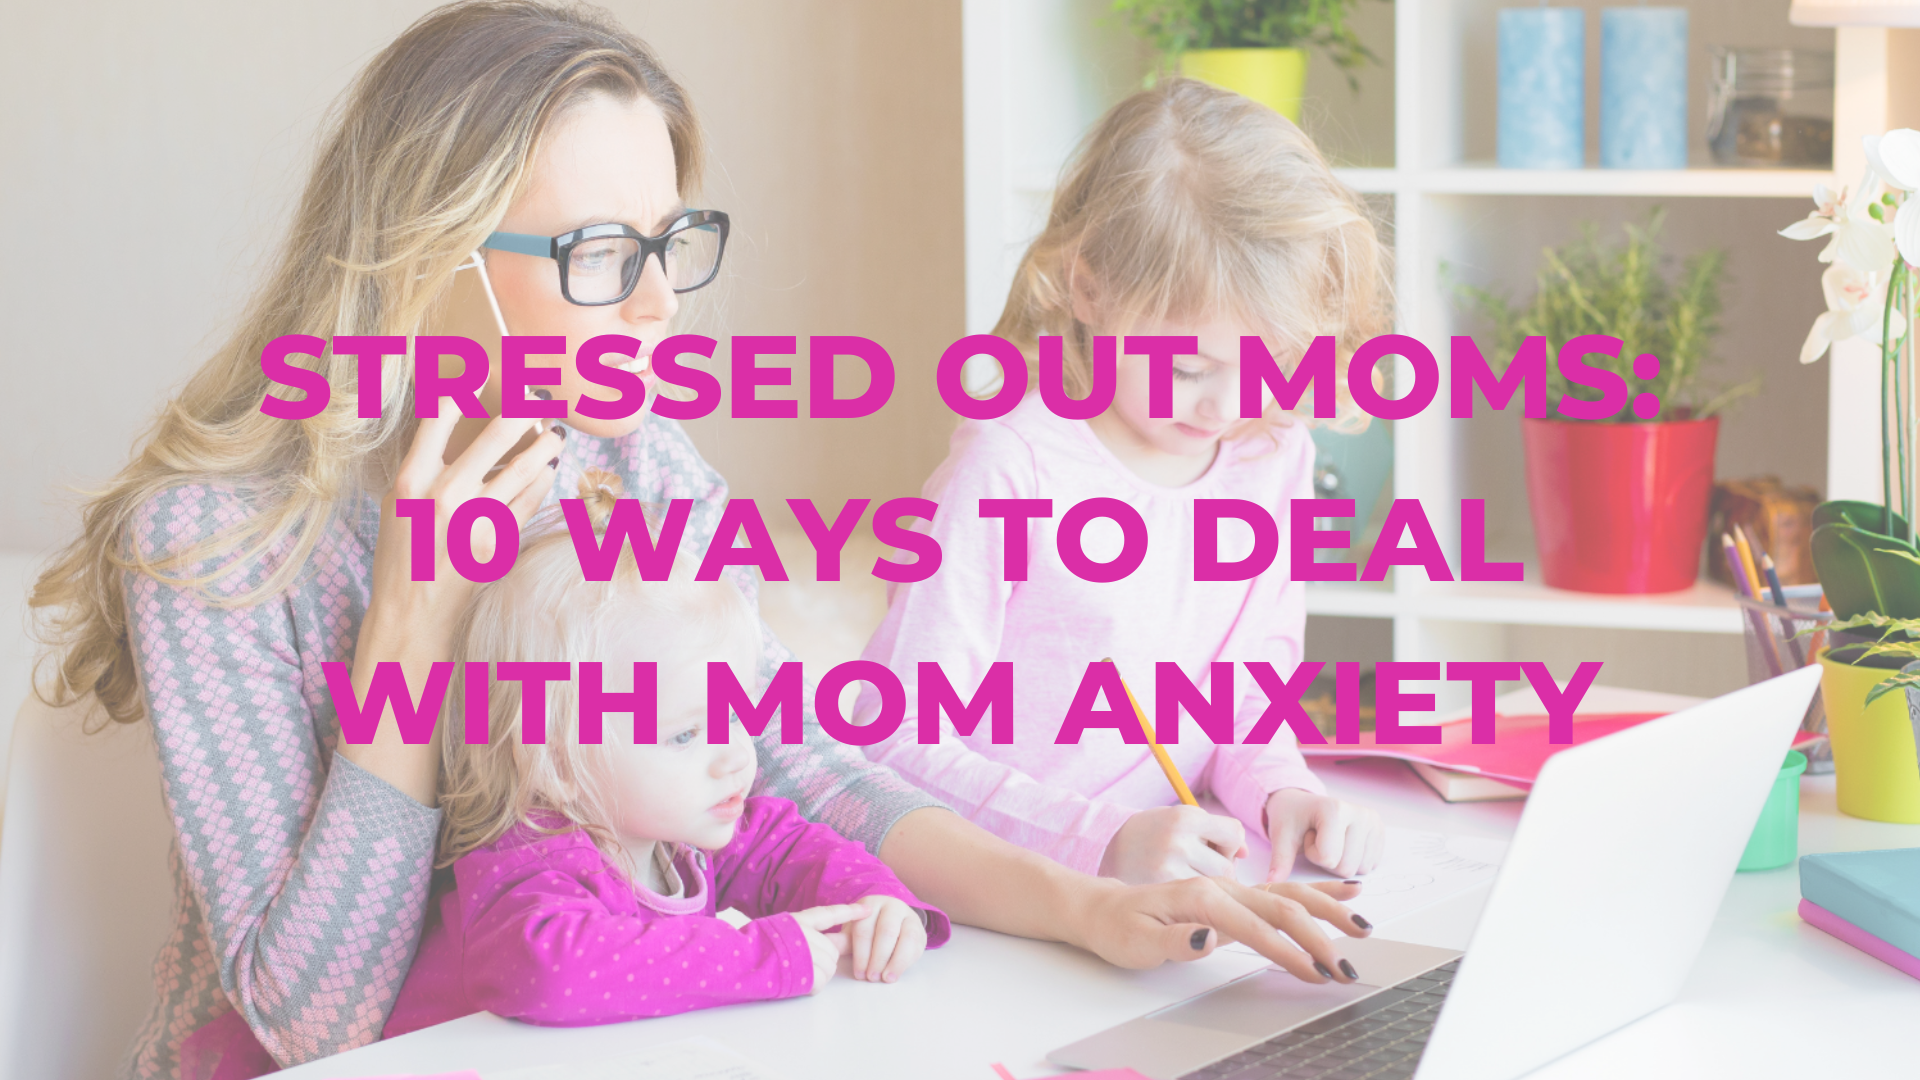 Stressed Out Moms: 10 Ways to Deal With Mom Anxiety